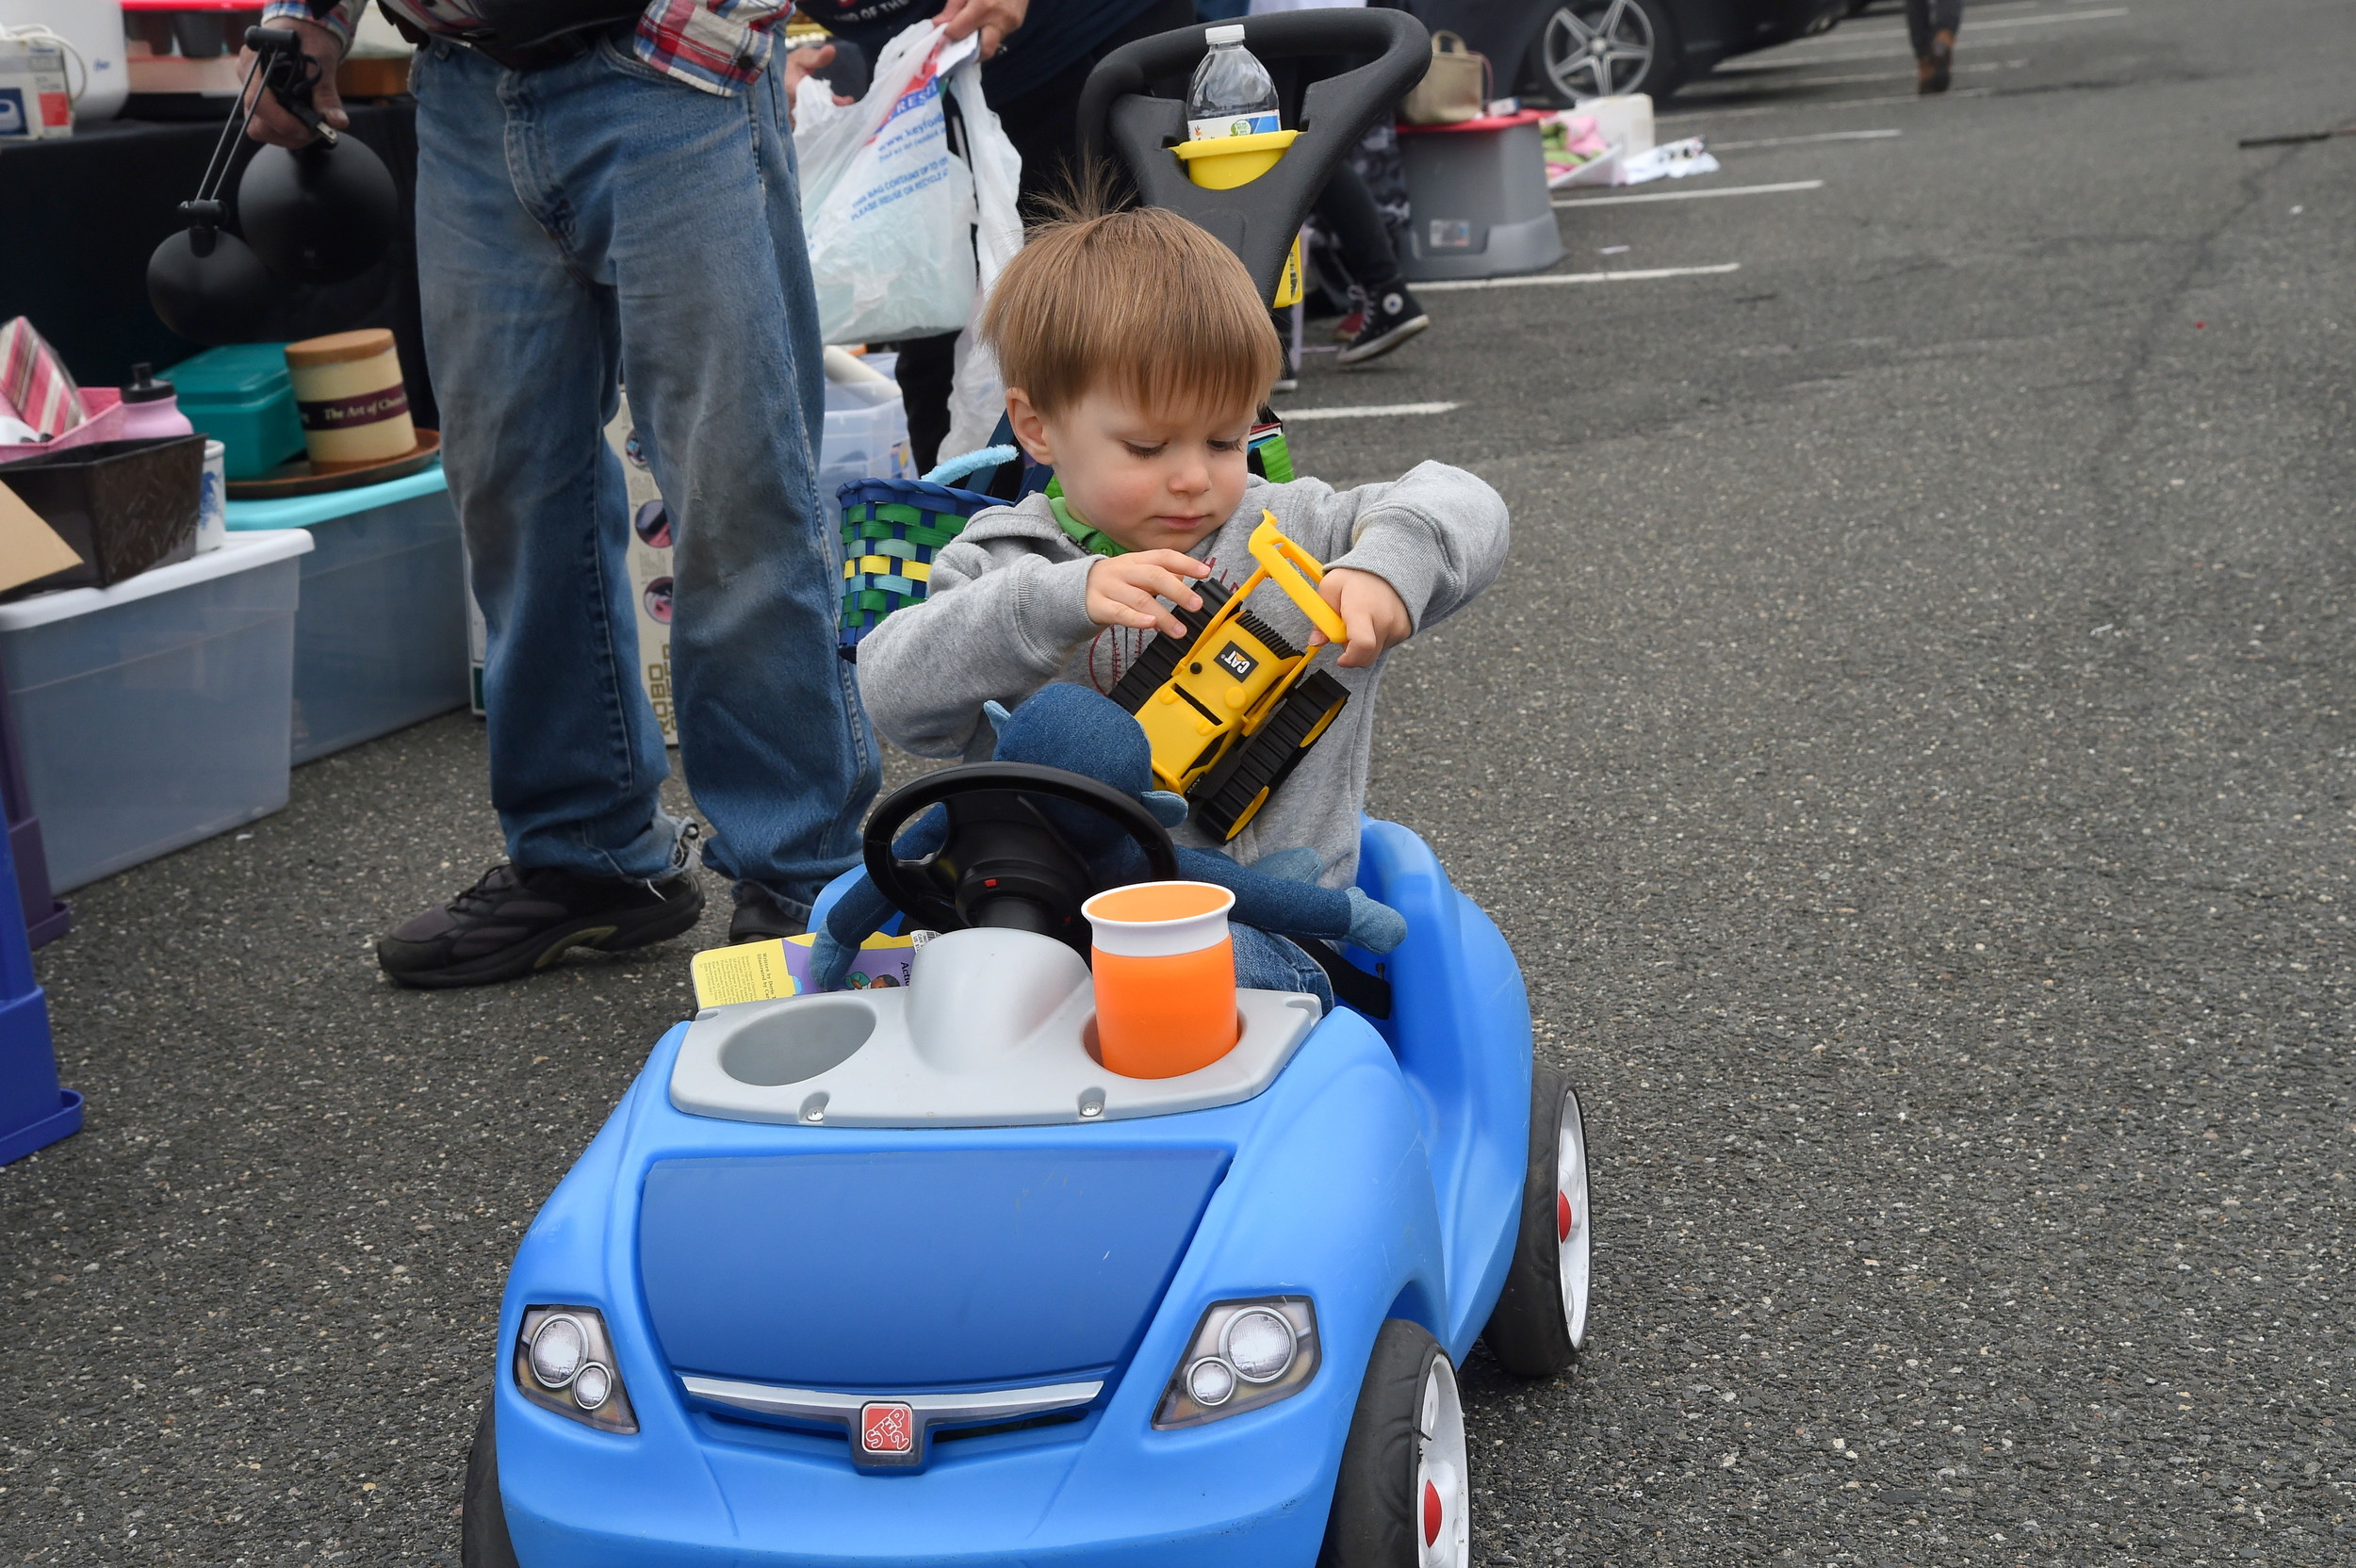 Tyler Read, 2, enjoyed playing with a toy truck at the fundraiser.